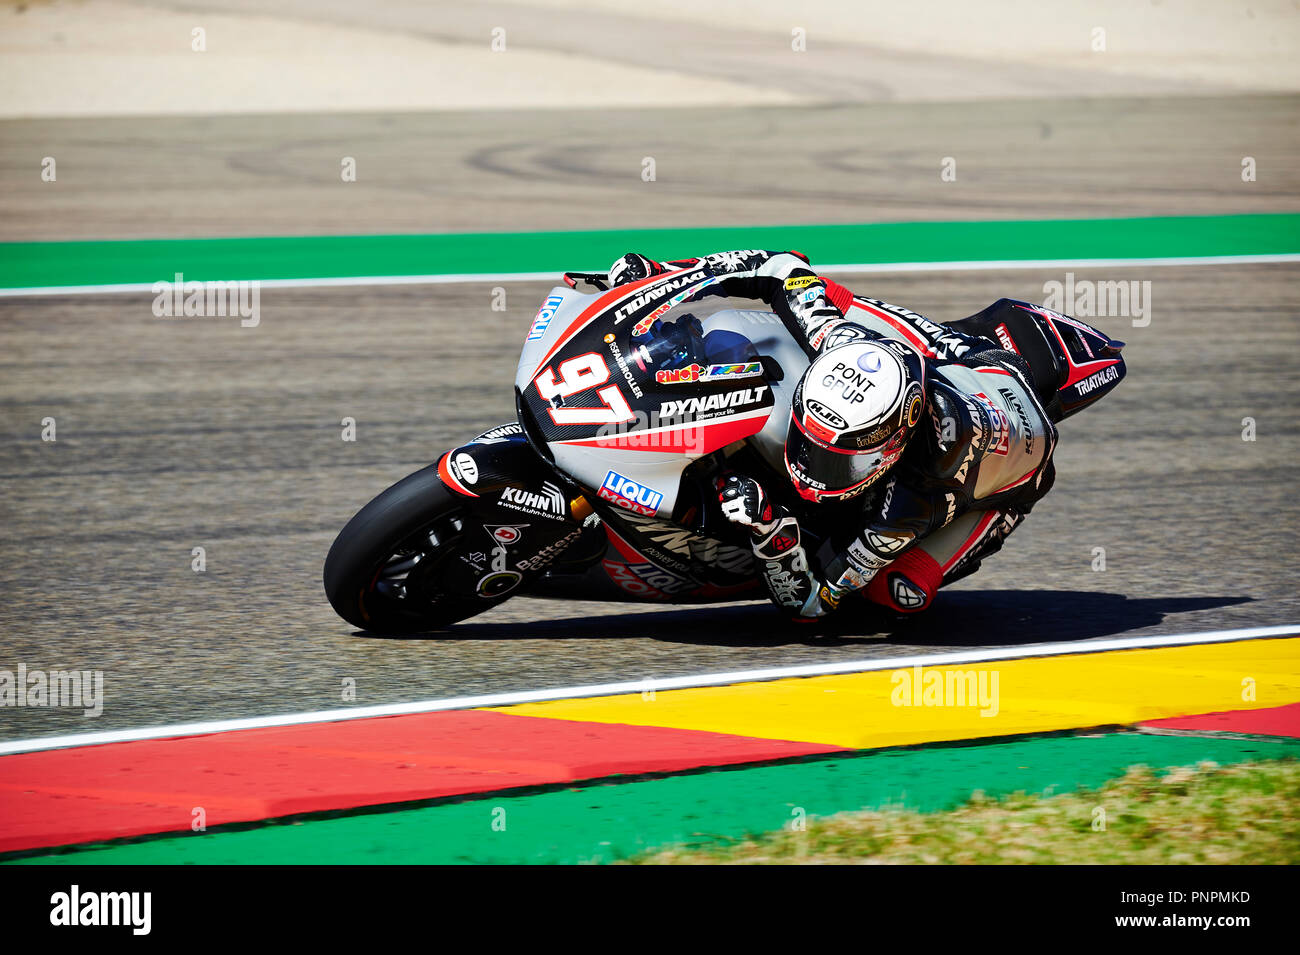 22nd September 2018, Ciudad del Motor de Aragon, Alcaniz, Spain; Motorcycling MotoGP of Aragon, Qualification; Xavi Vierge of the Dynavolt Intact GP Moto 2 Team rounds the bend during the qualifying Stock Photo